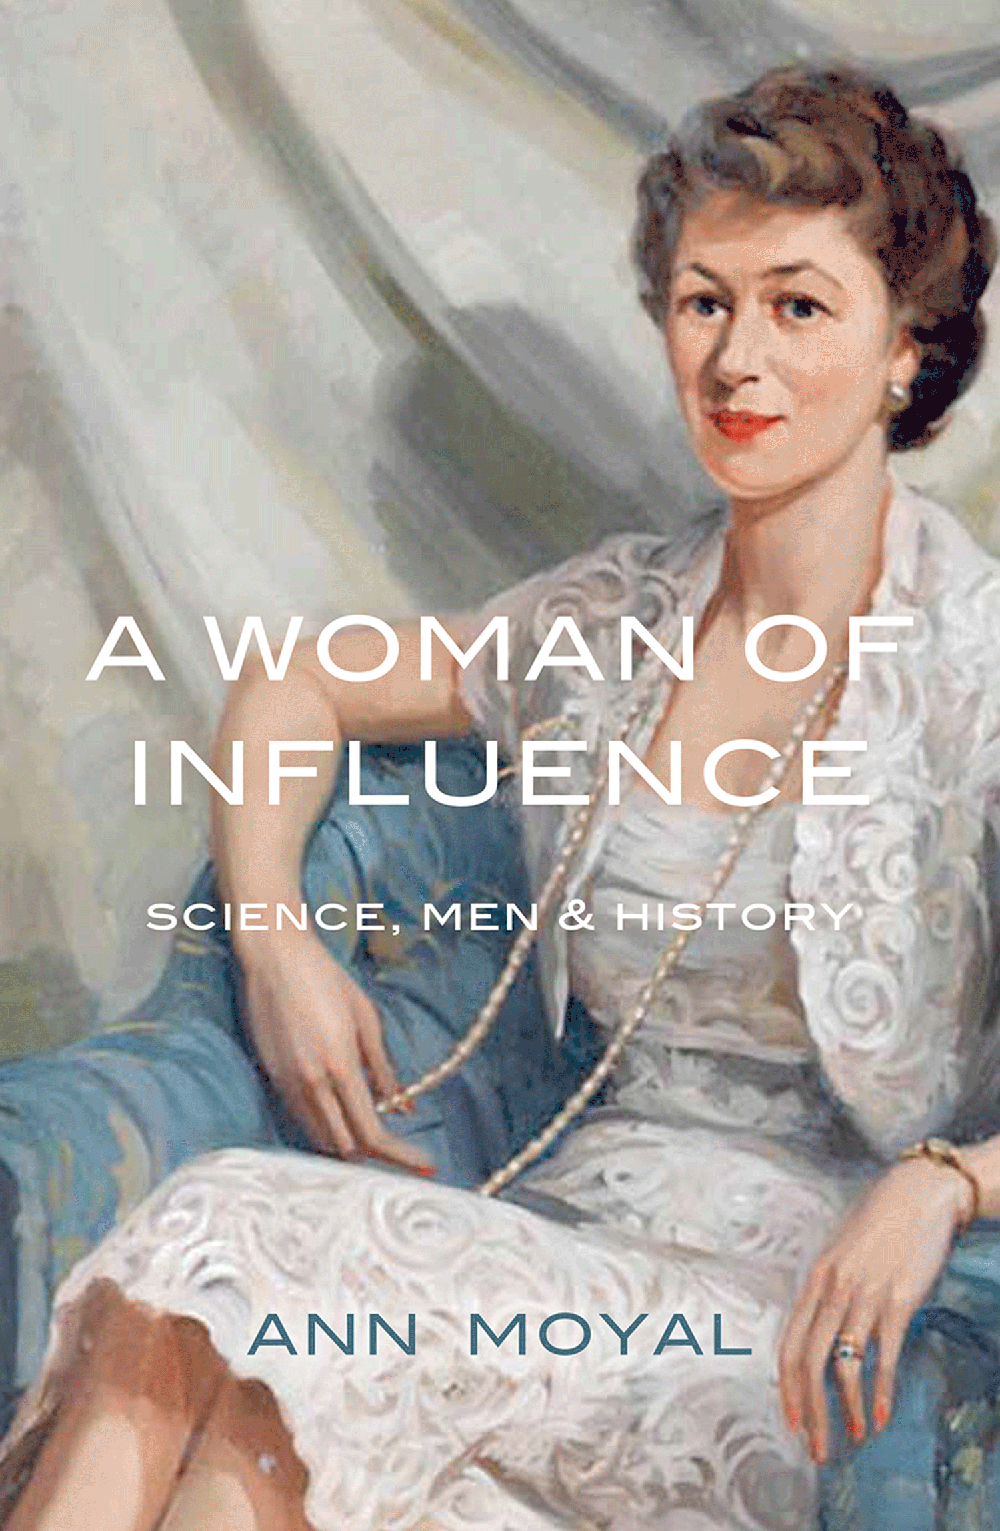 A Woman of Influence: Science, men & history